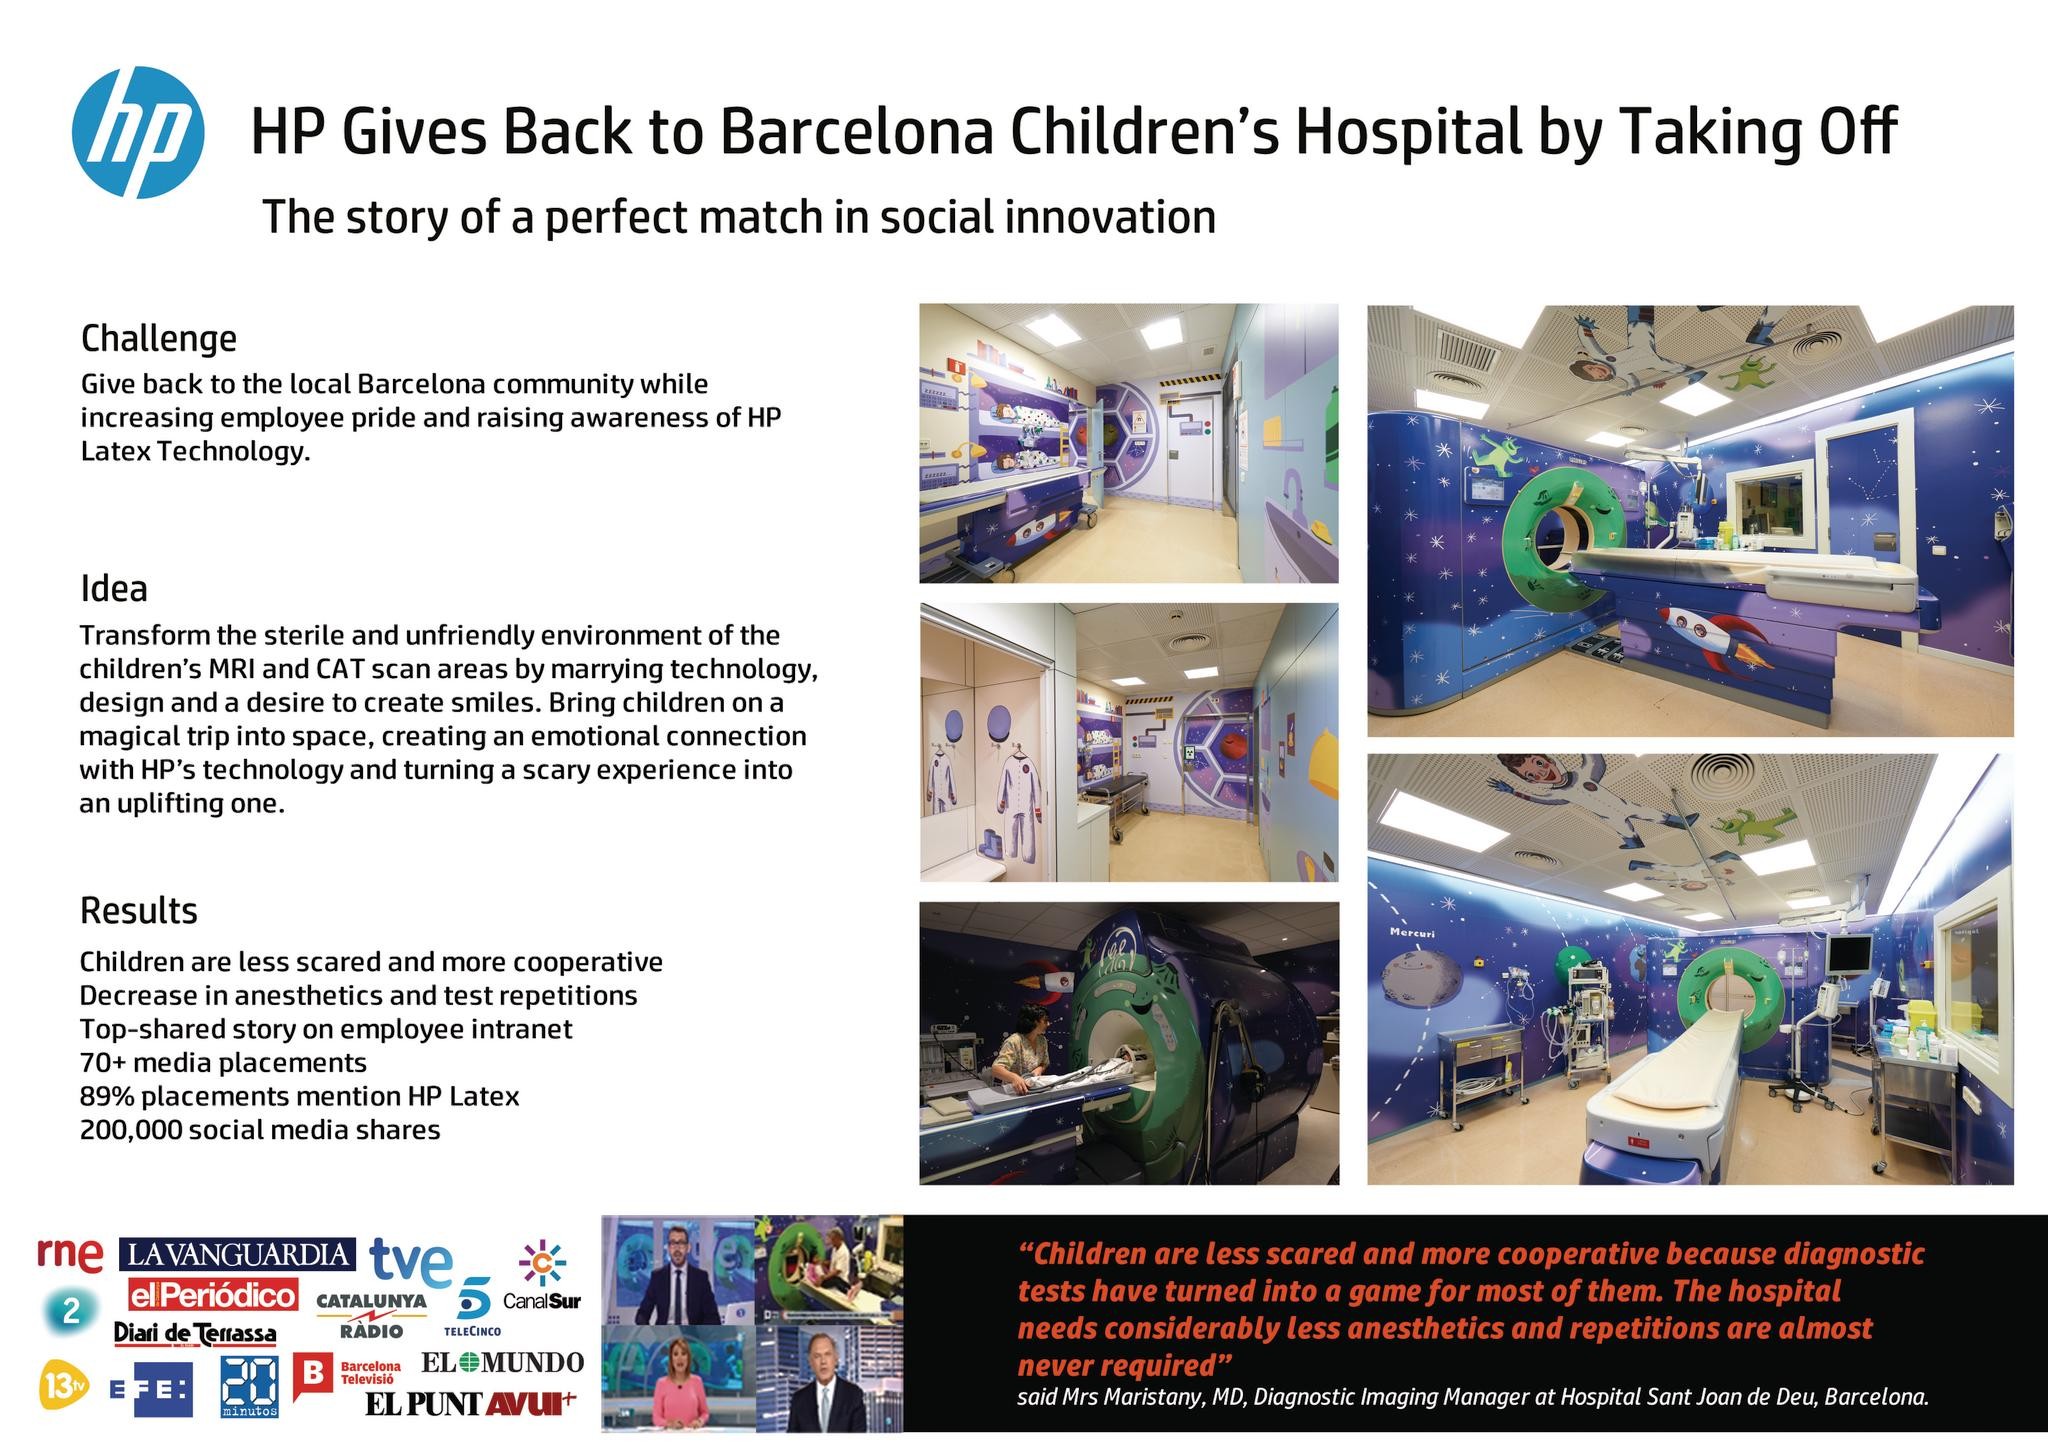 HP GIVES BACK TO BARCELONA CHILDREN’S HOSPITAL BY TAKING OFF